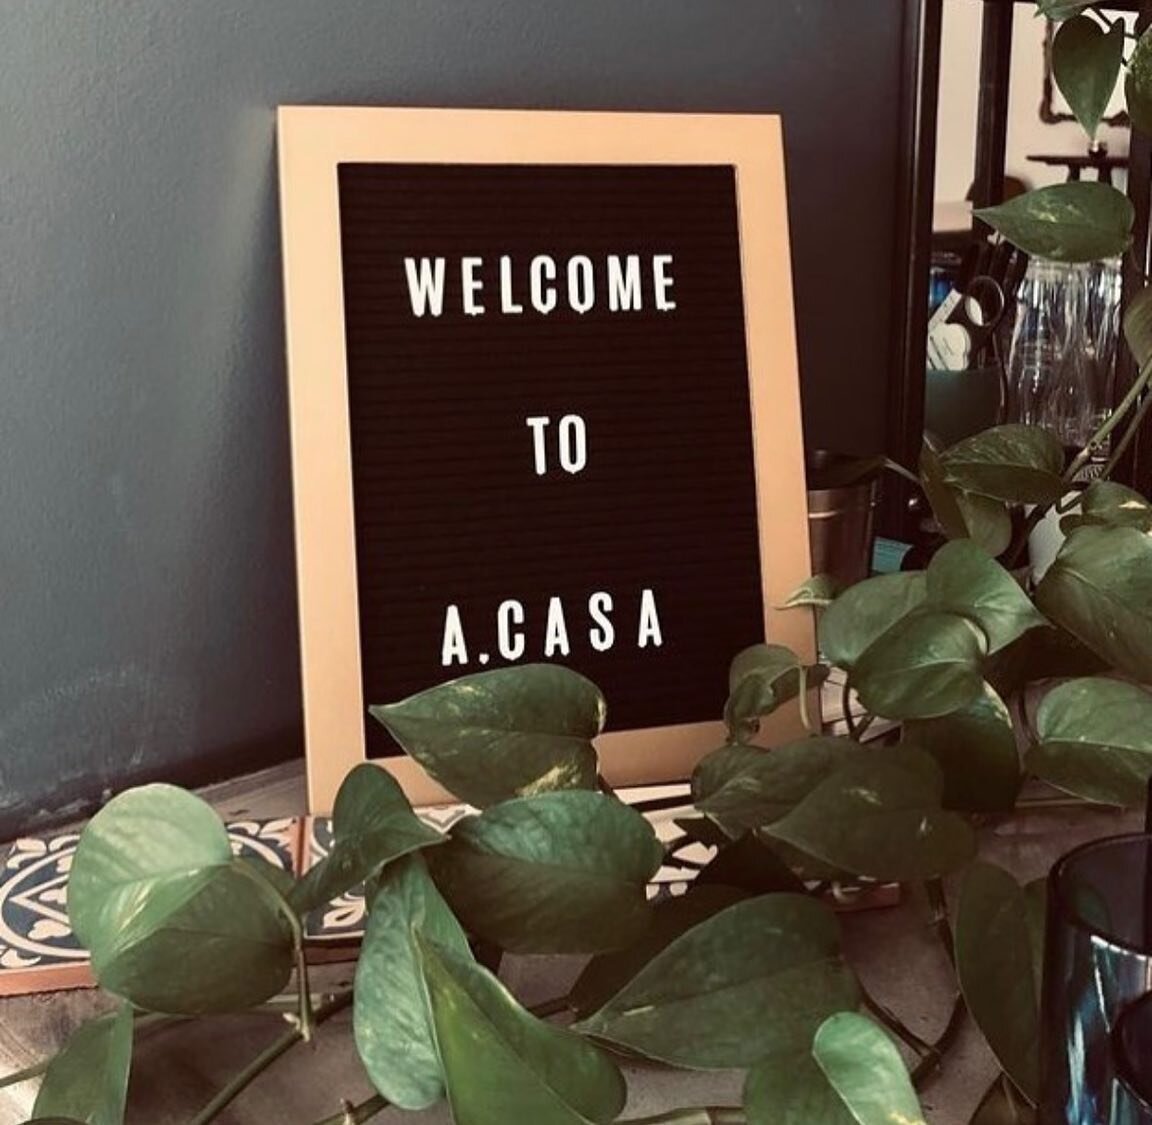 Welcome to a.casa! 

If you are new here, WELCOME! We are a community event space located in the heart of south city! At a.casa we create experiences for all people. We celebrate all backgrounds, stories &amp; seasons. An experience at a.casa is more